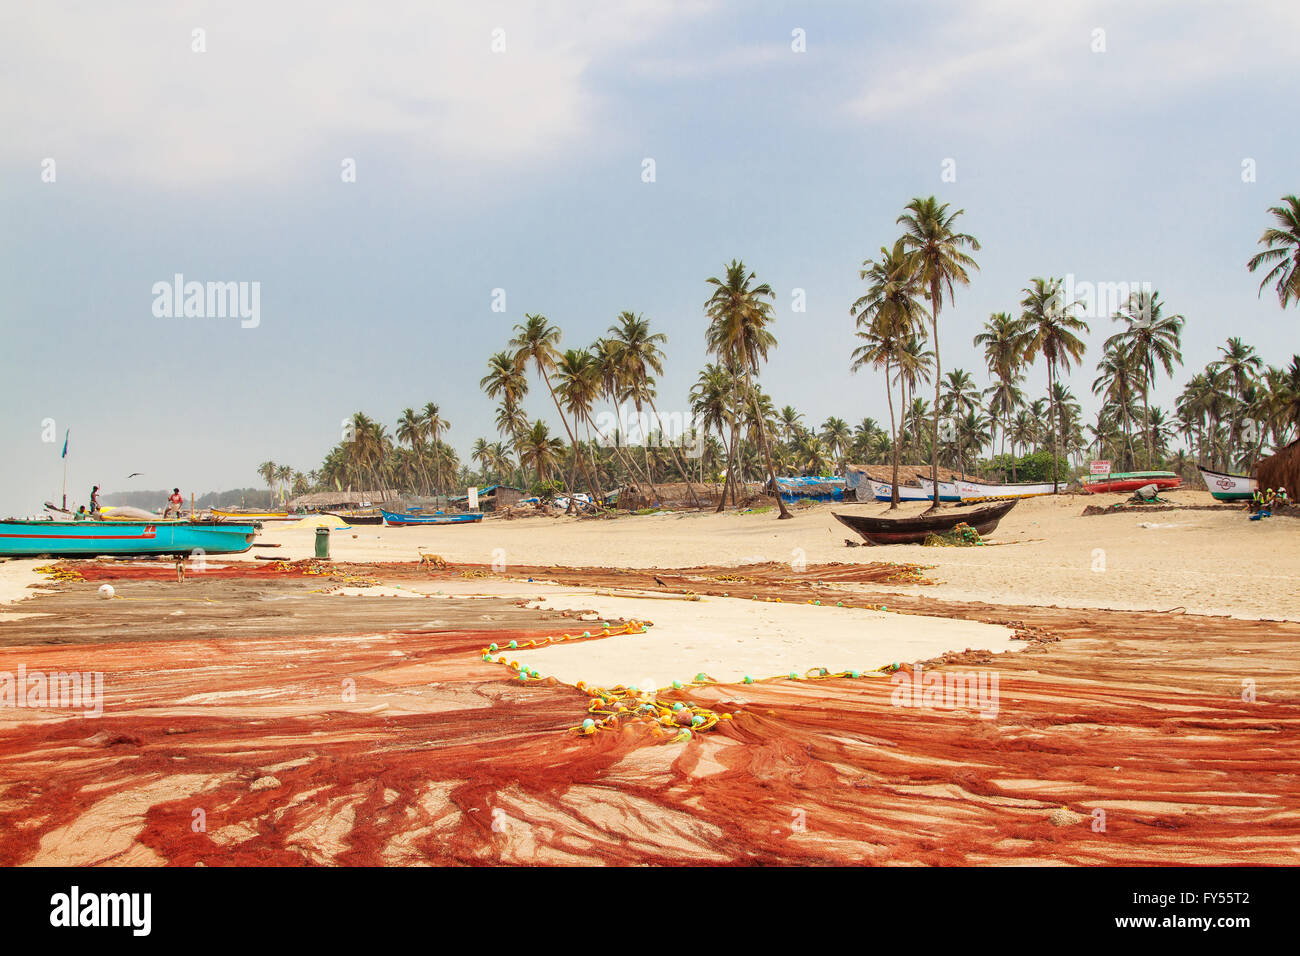 Kolva, India - April 20, 2016: Bright relax travel lanscape with fisherma boats and palms Stock Photo